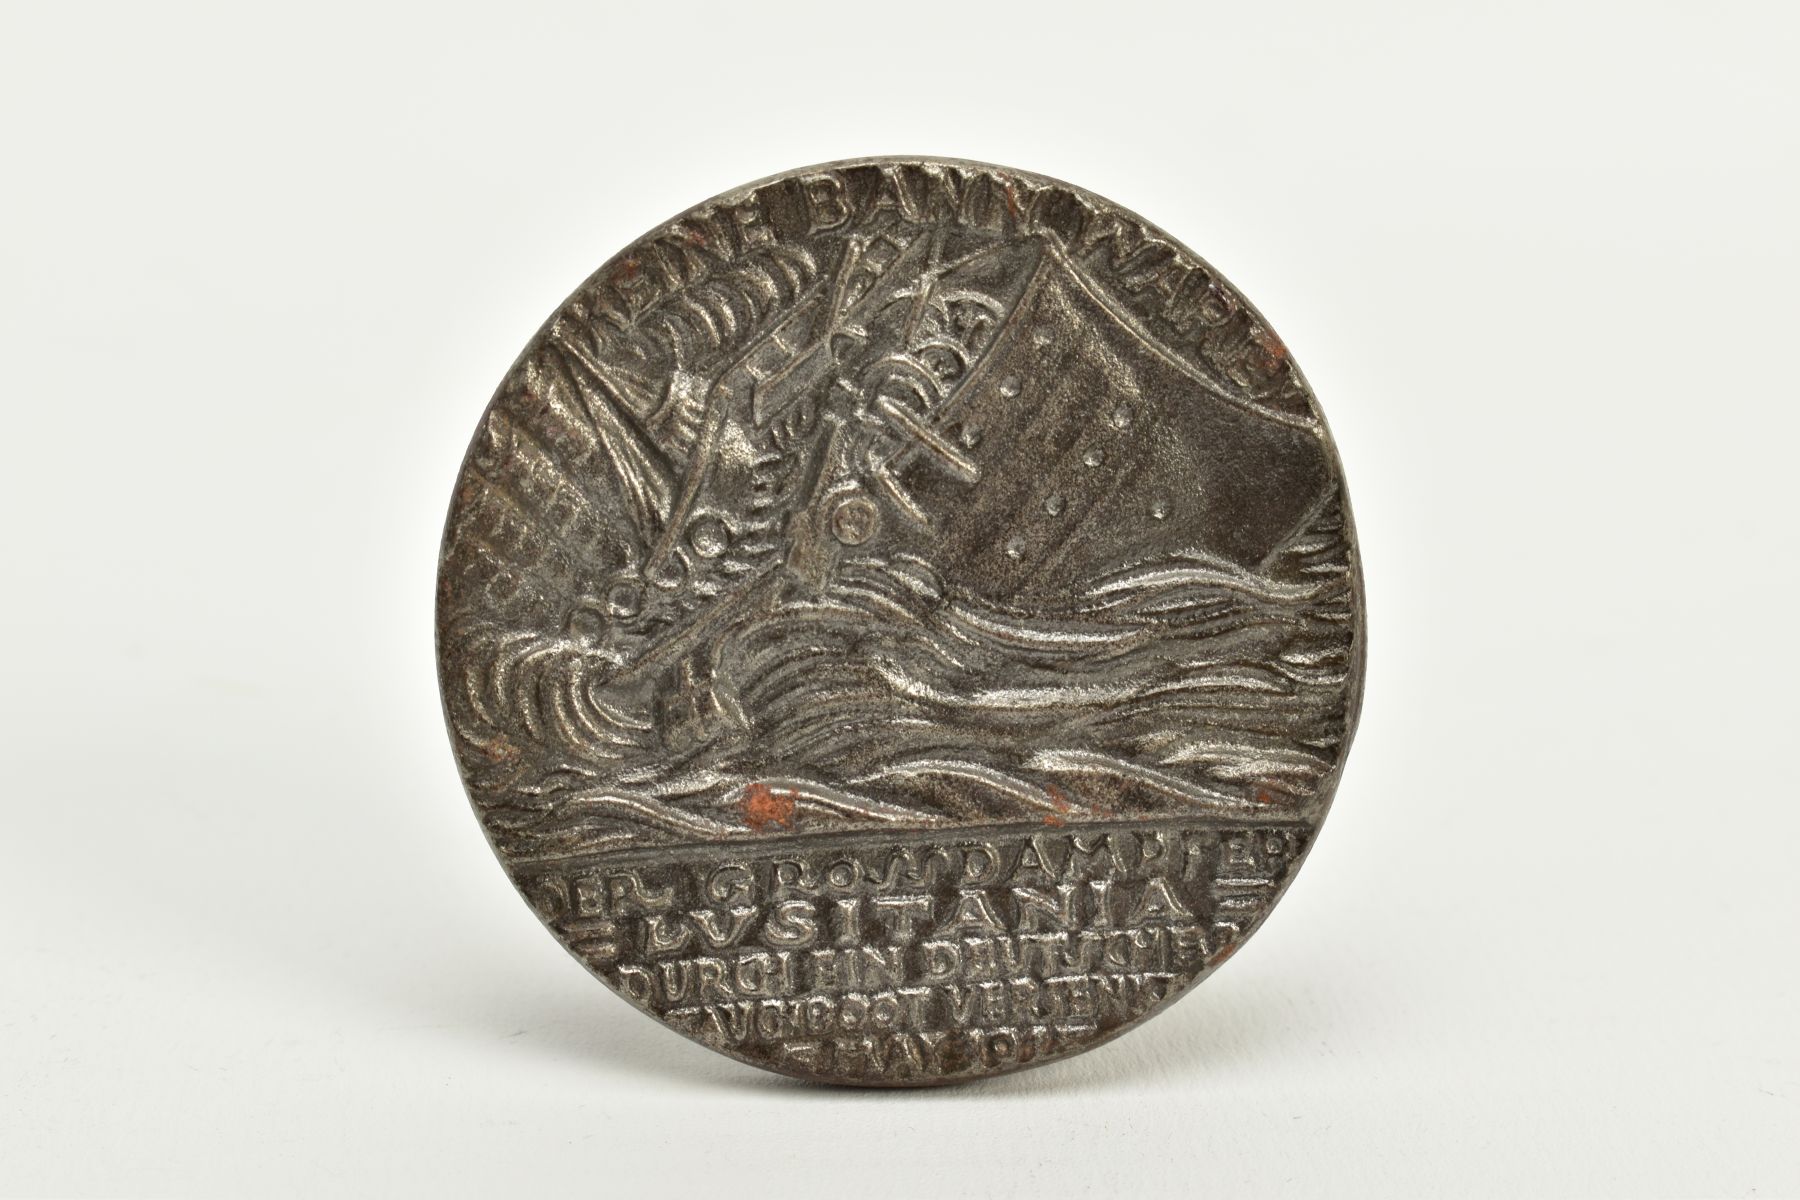 A CASED REPLICA R.M.S. LUSITANIA MEDALLION, commemorative medallion depicting the sinking of the ' - Image 3 of 4